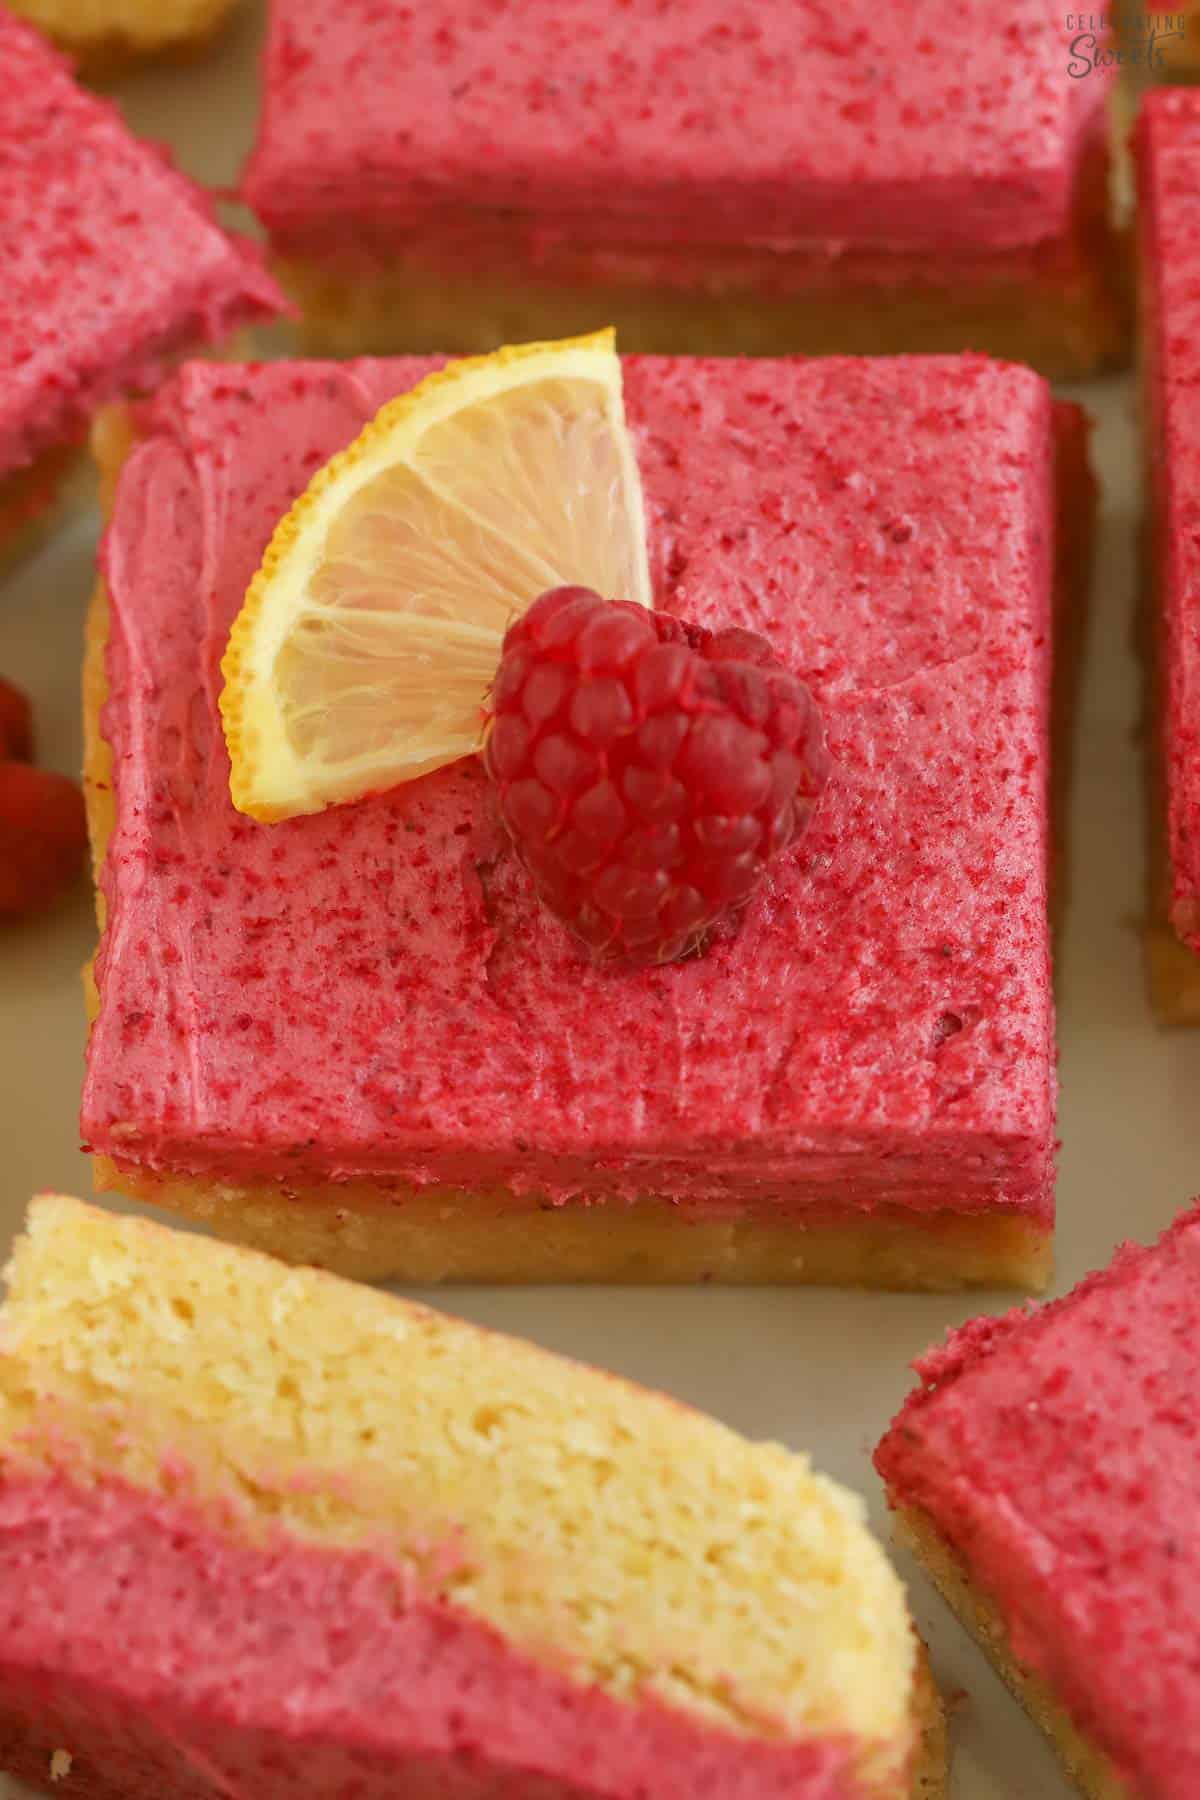 Lemon bar topped with pink frosting and garnished with a lemon slice and raspberry.